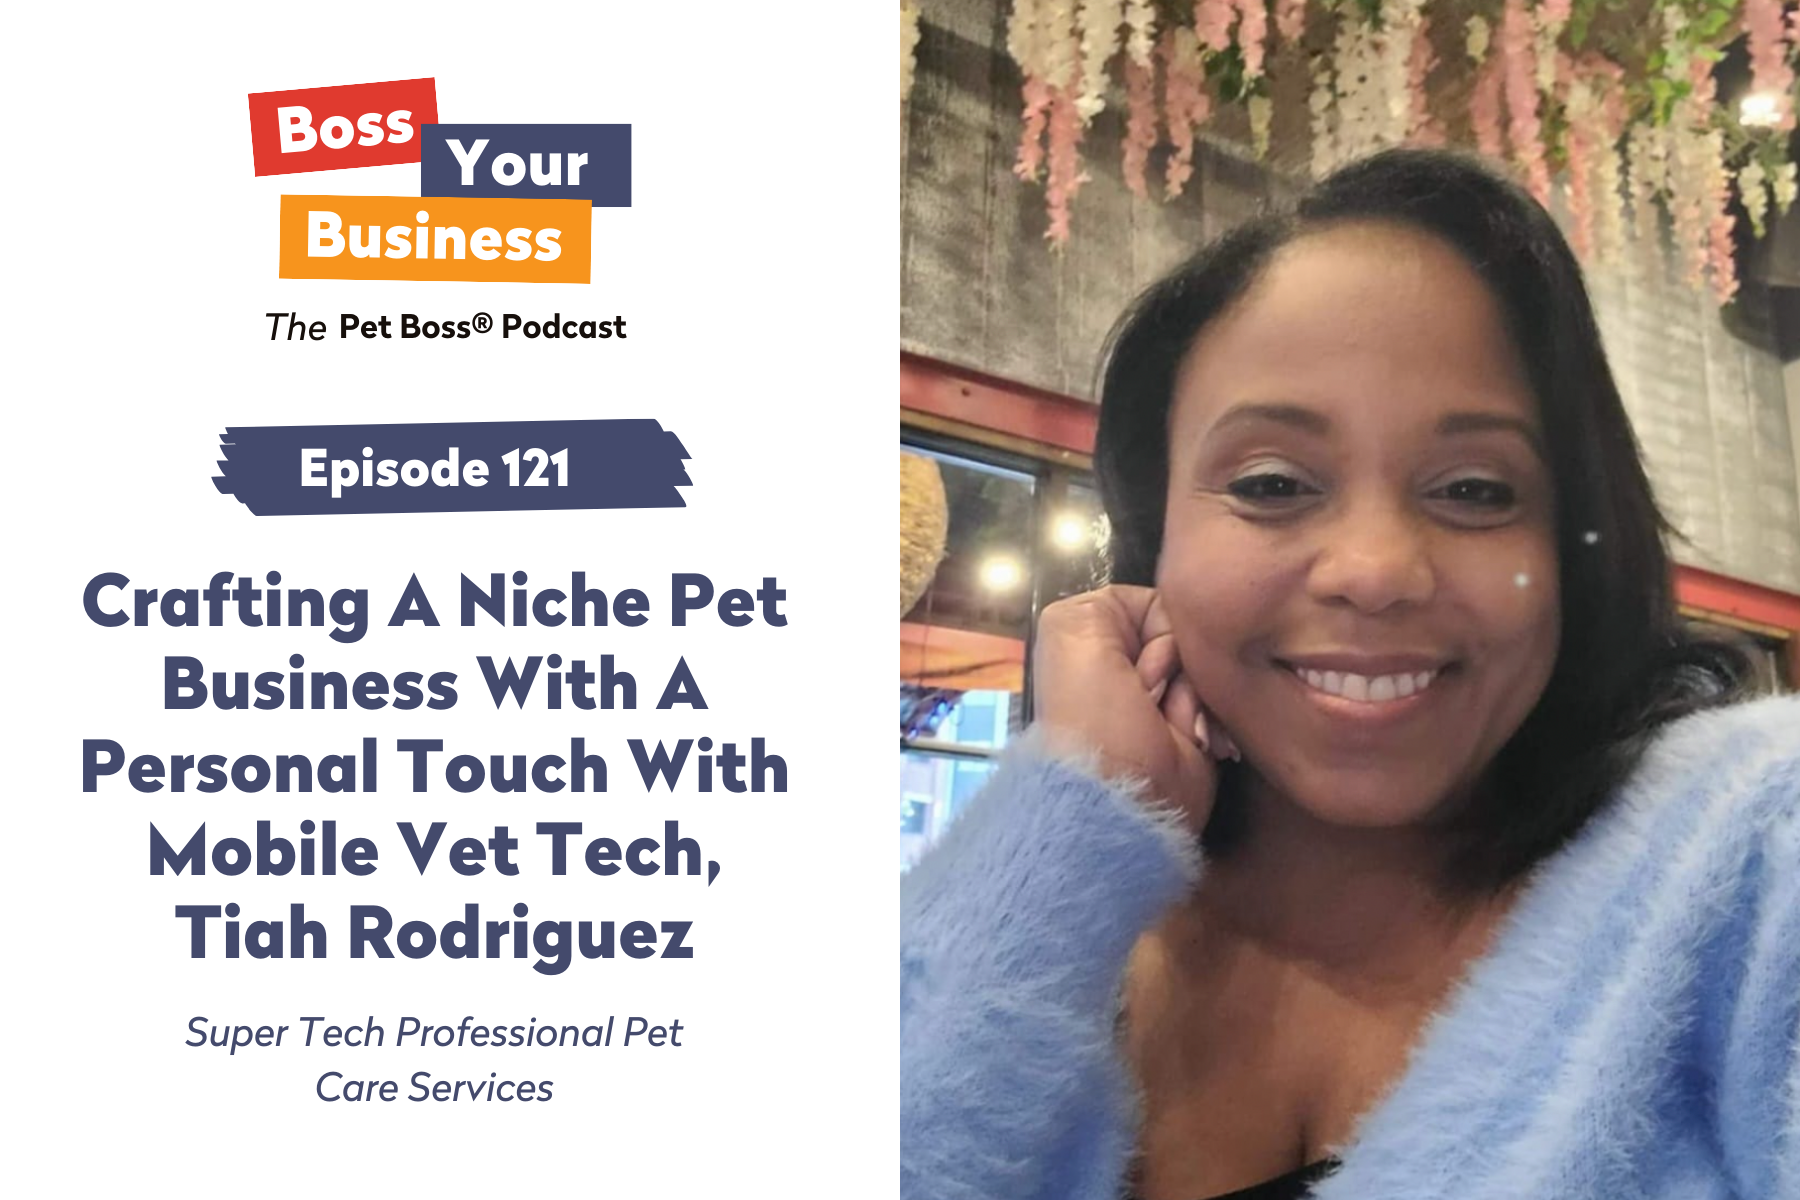 Episode 121 | Crafting A Niche Pet Business With A Personal Touch With Mobile Vet Tech, Tiah Rodriguez